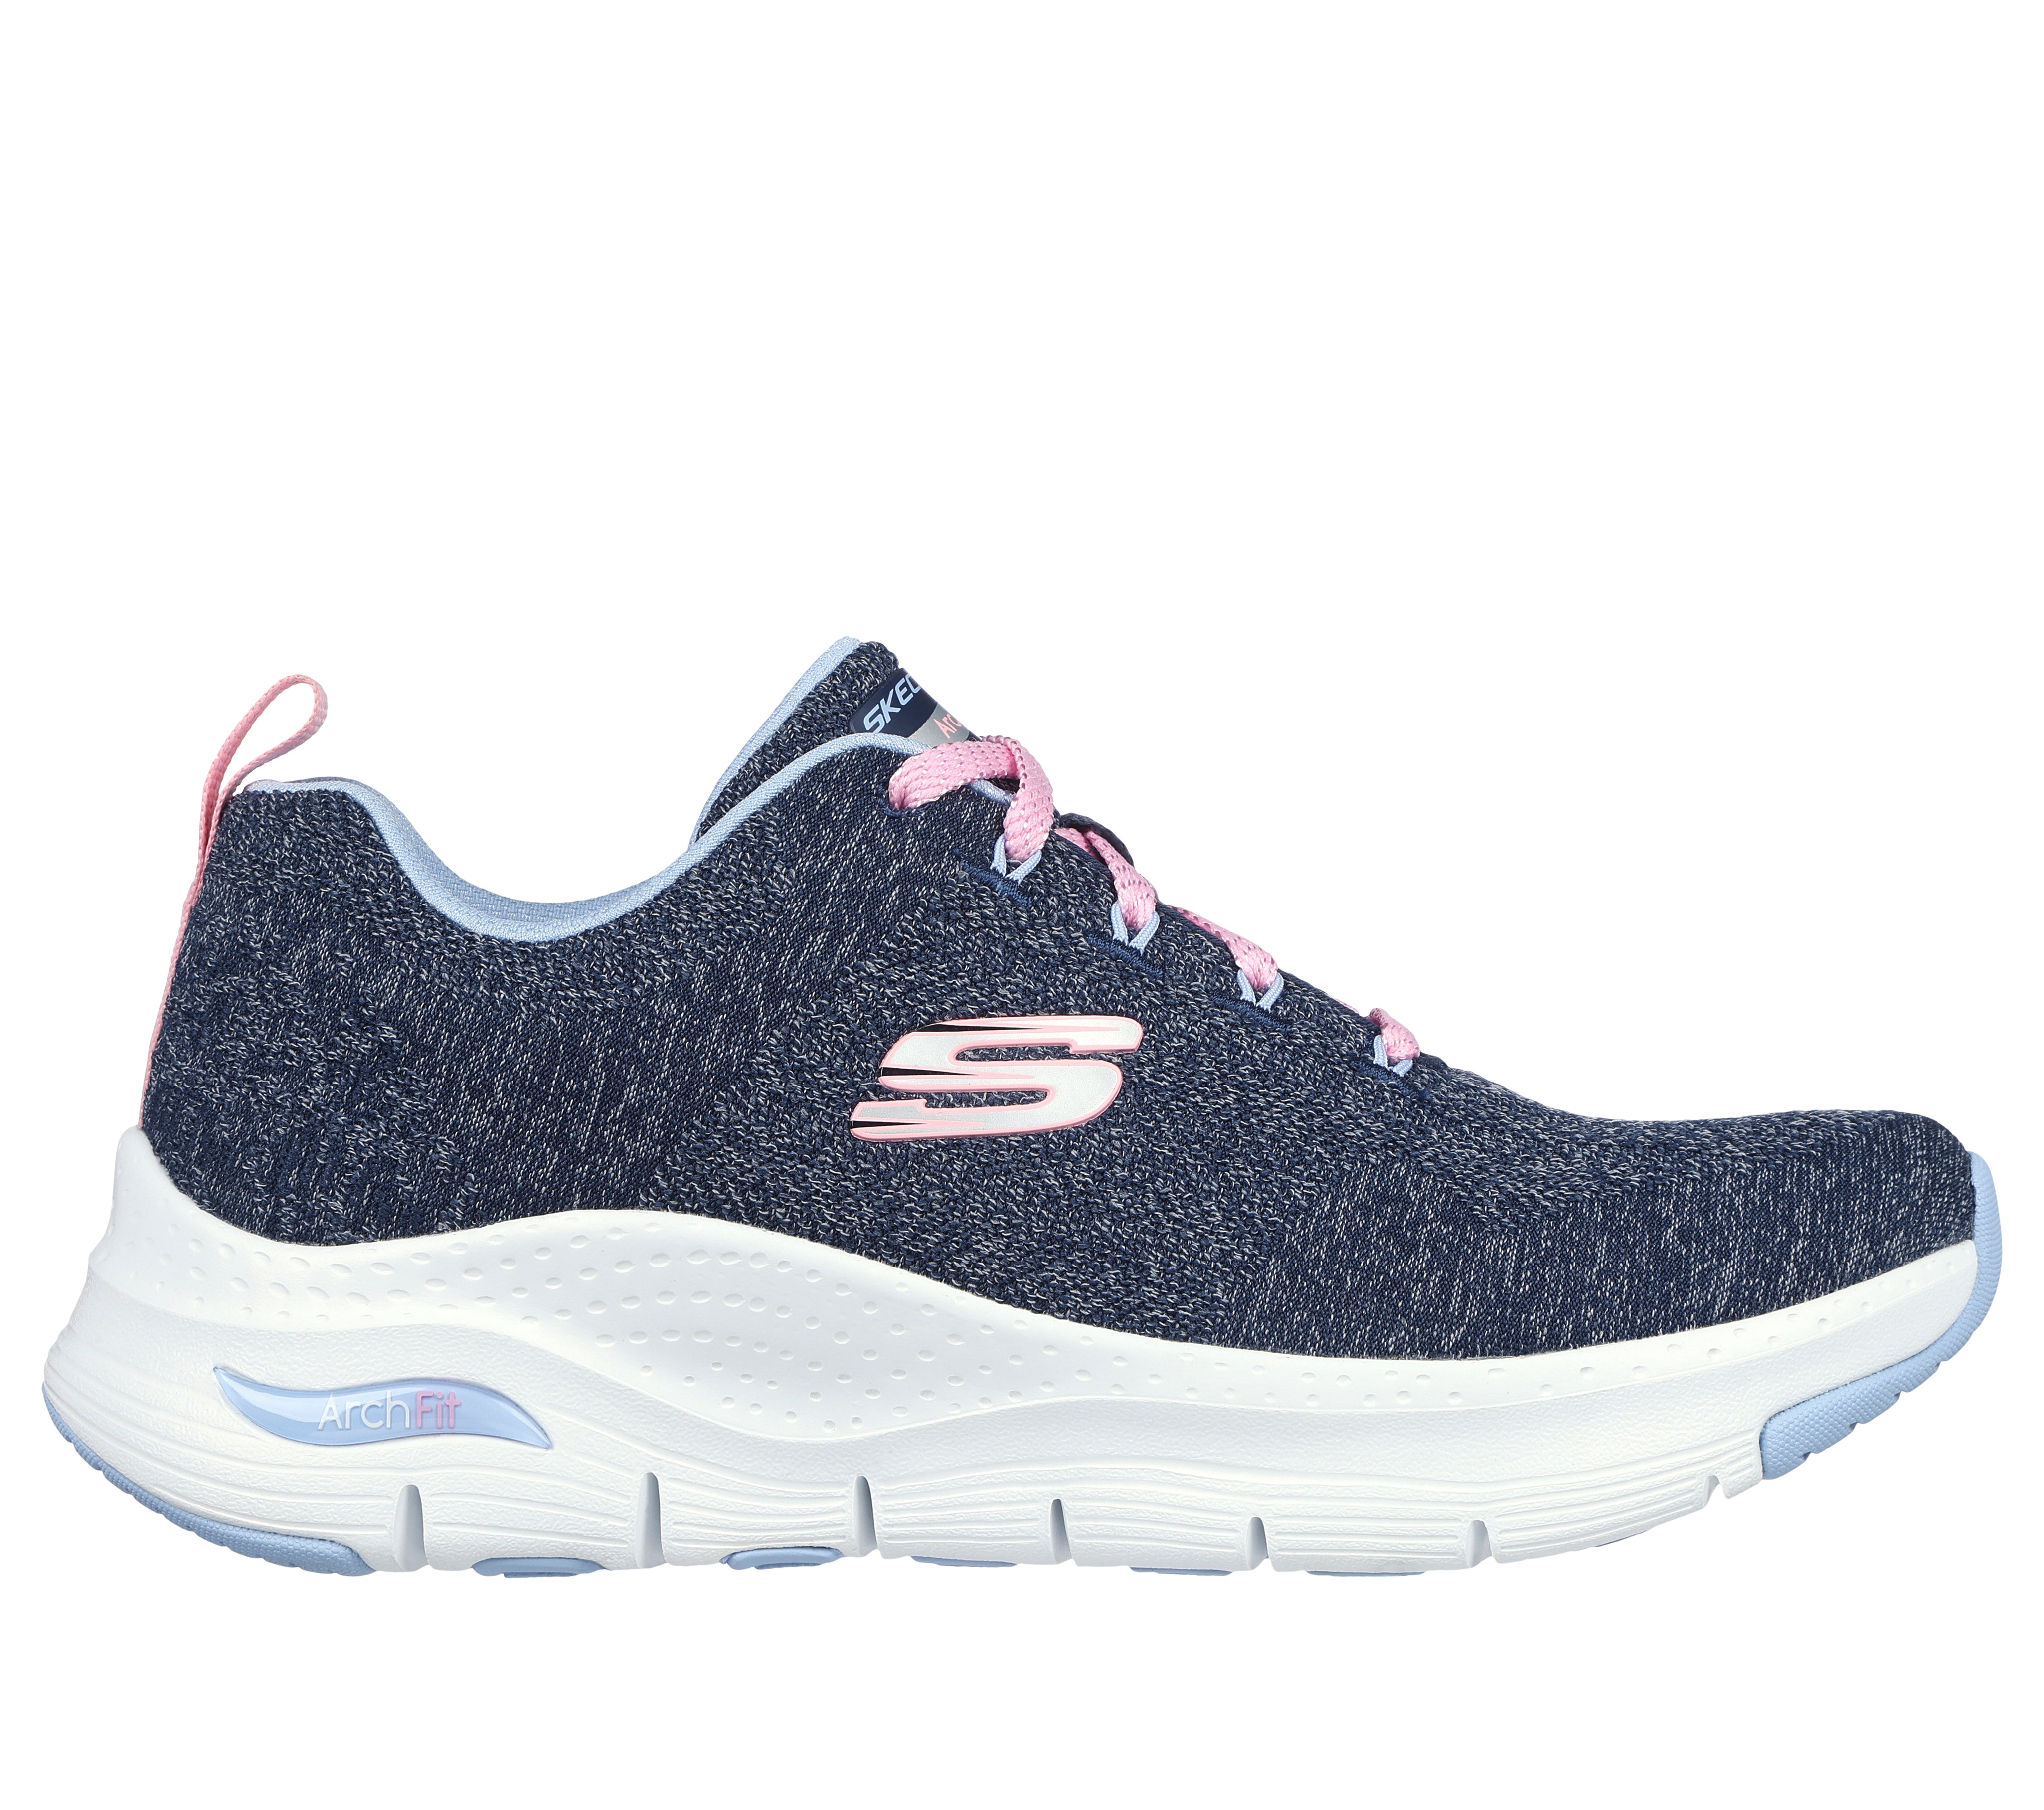 149414 - SKECHERS ARCH FIT - COMFY WAVE